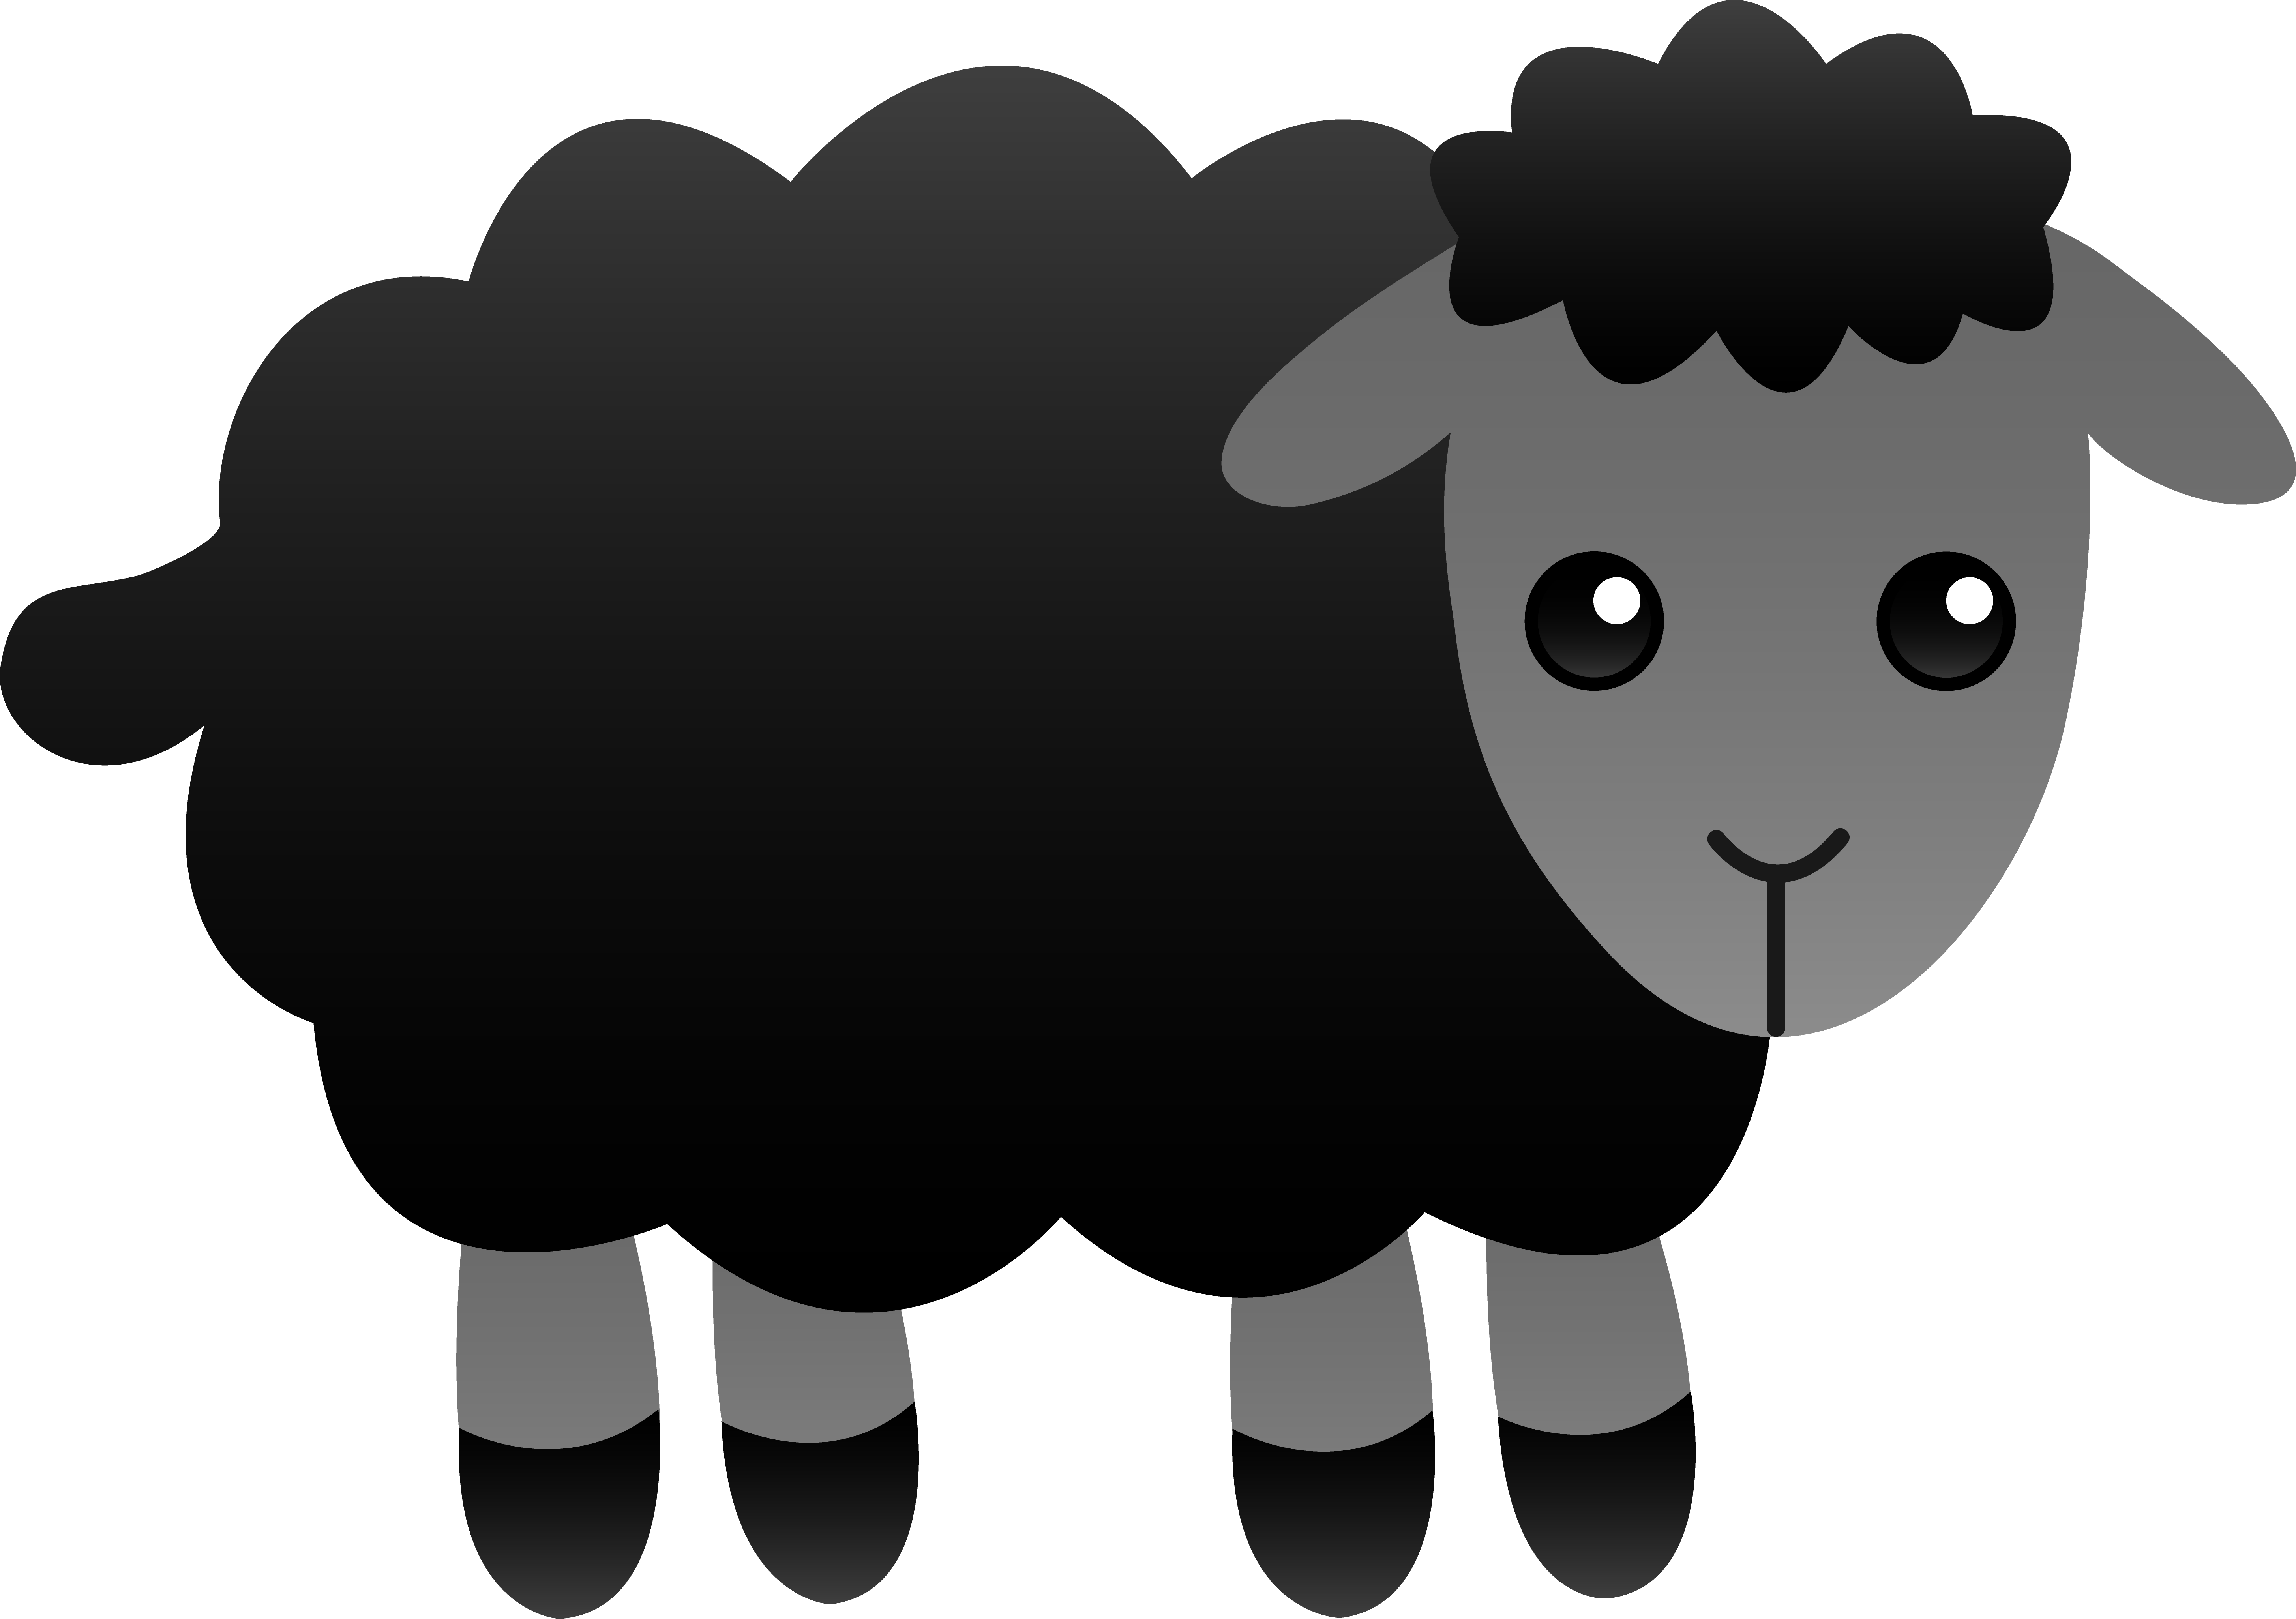 Free Sheep Silhouette Vector, Download Free Clip Art, Free.